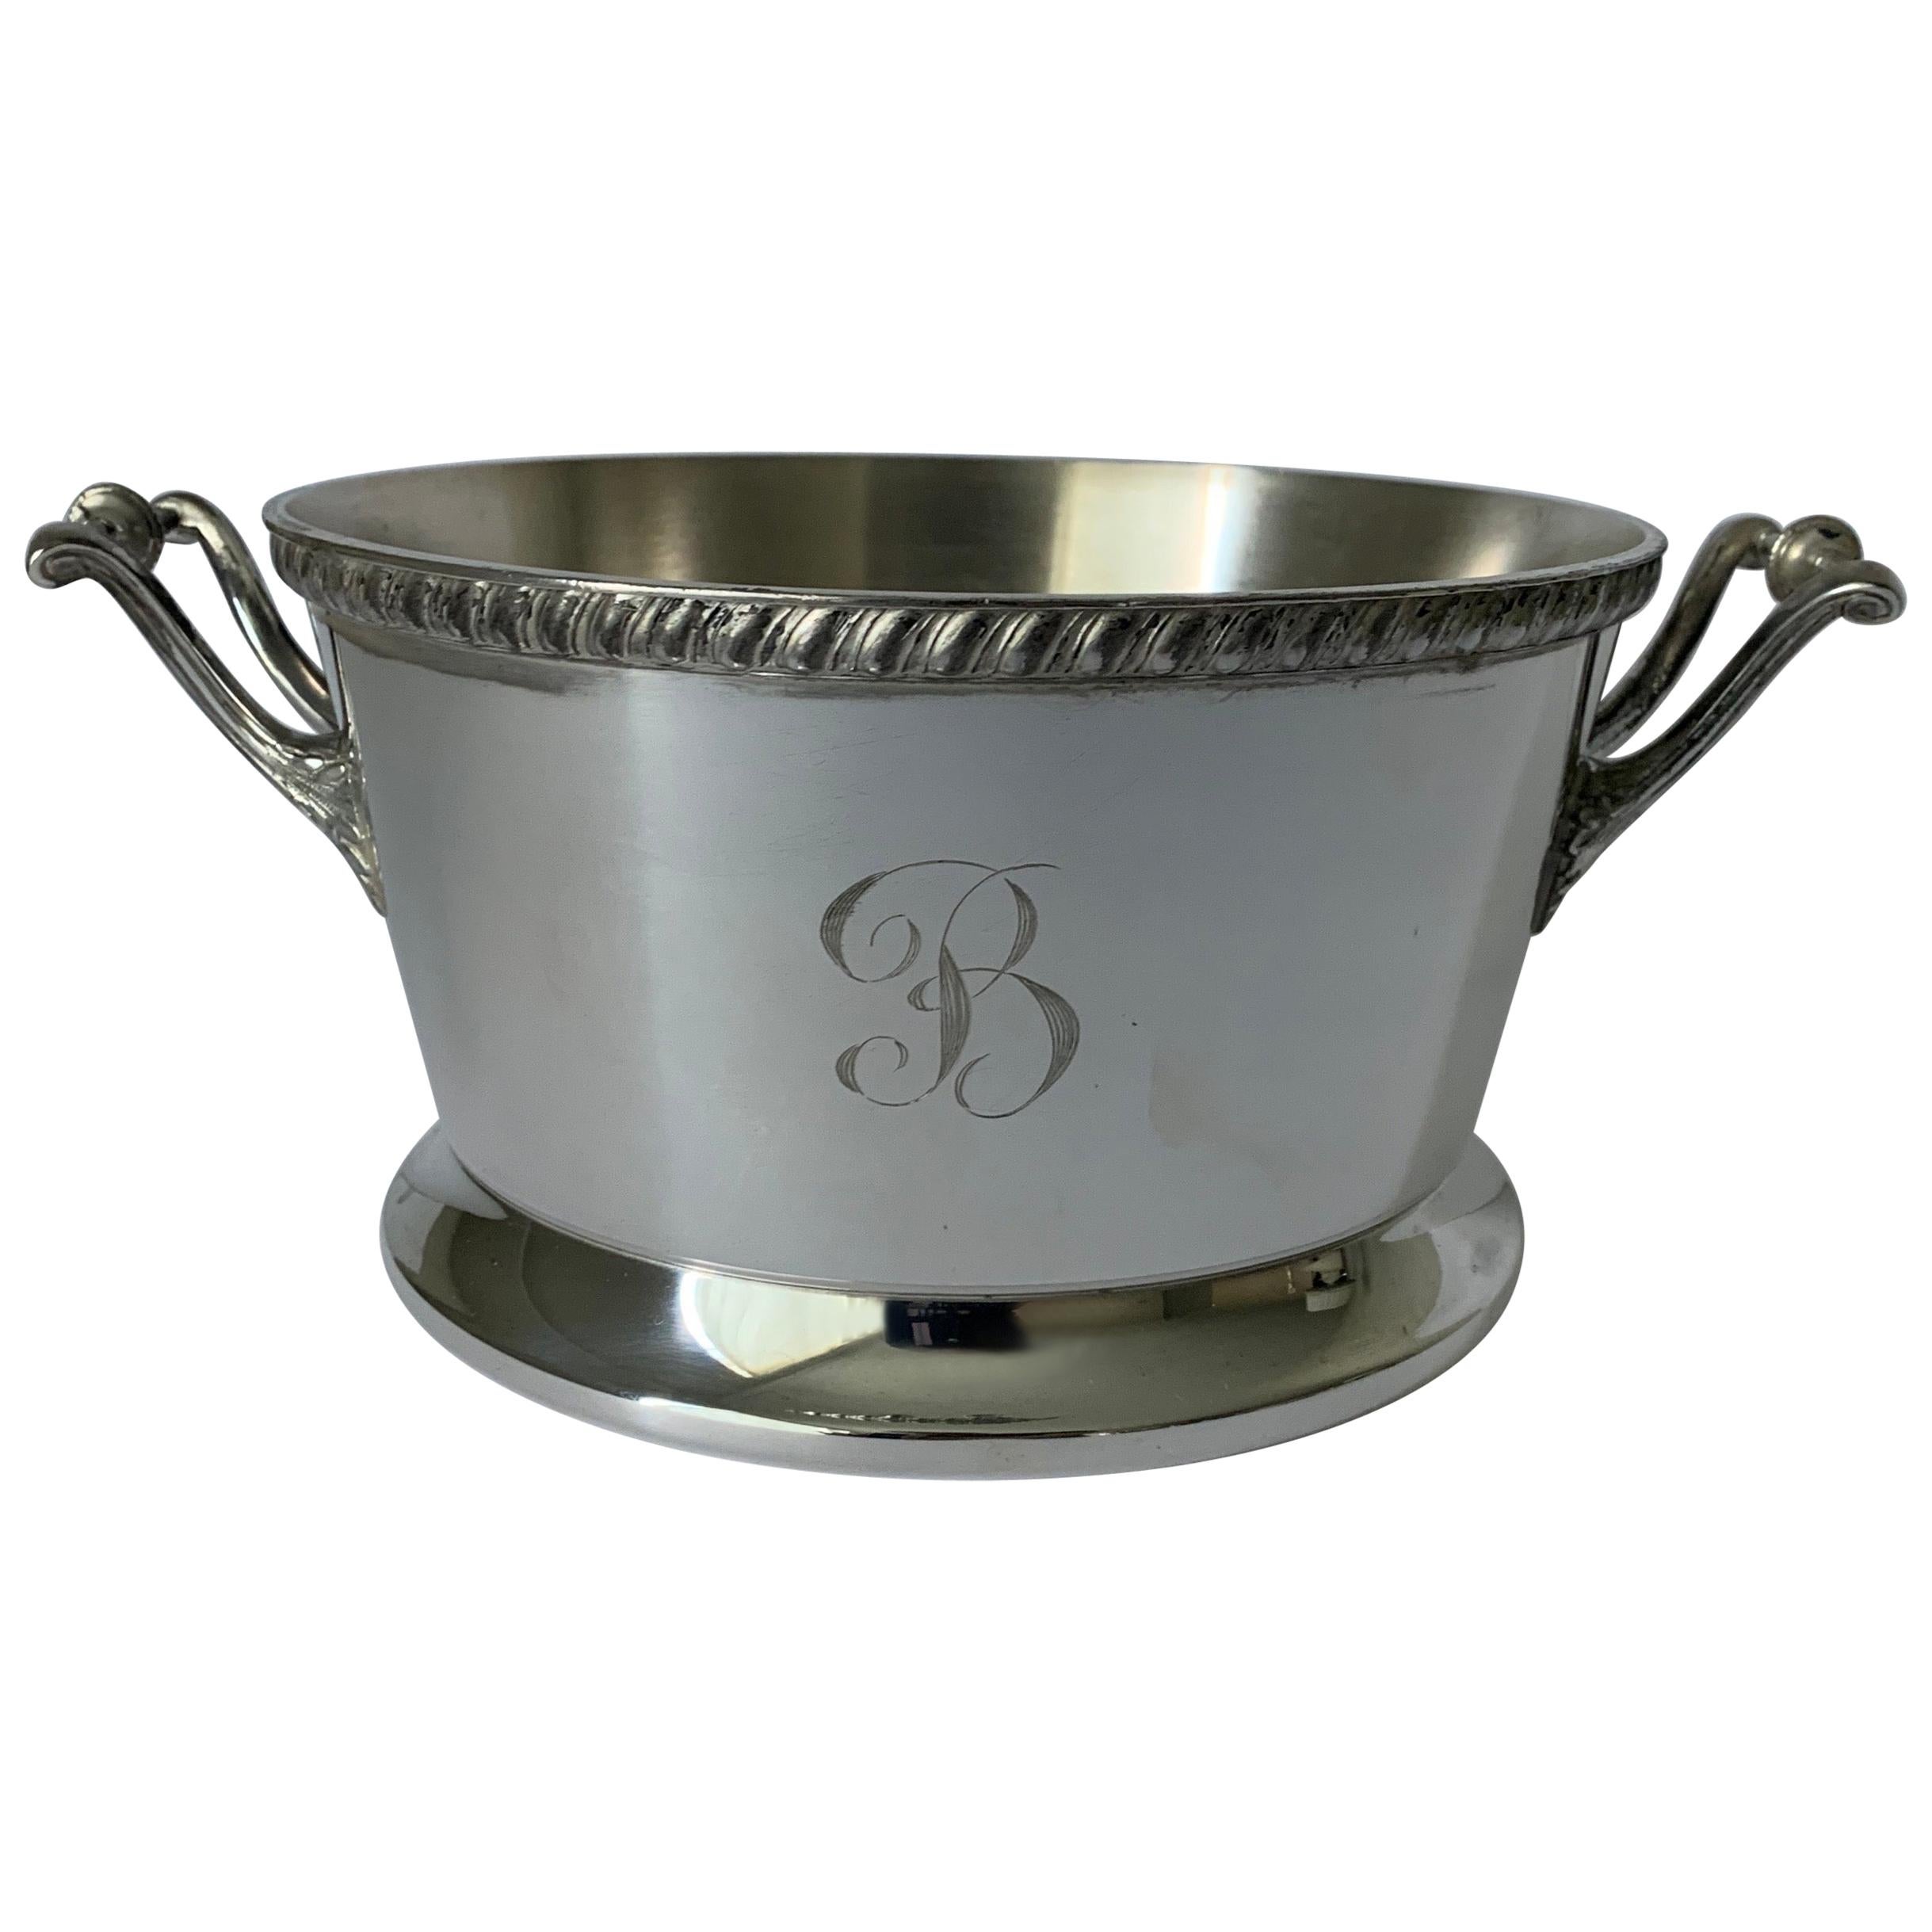 Silver Planter or Bucket with B Monogram